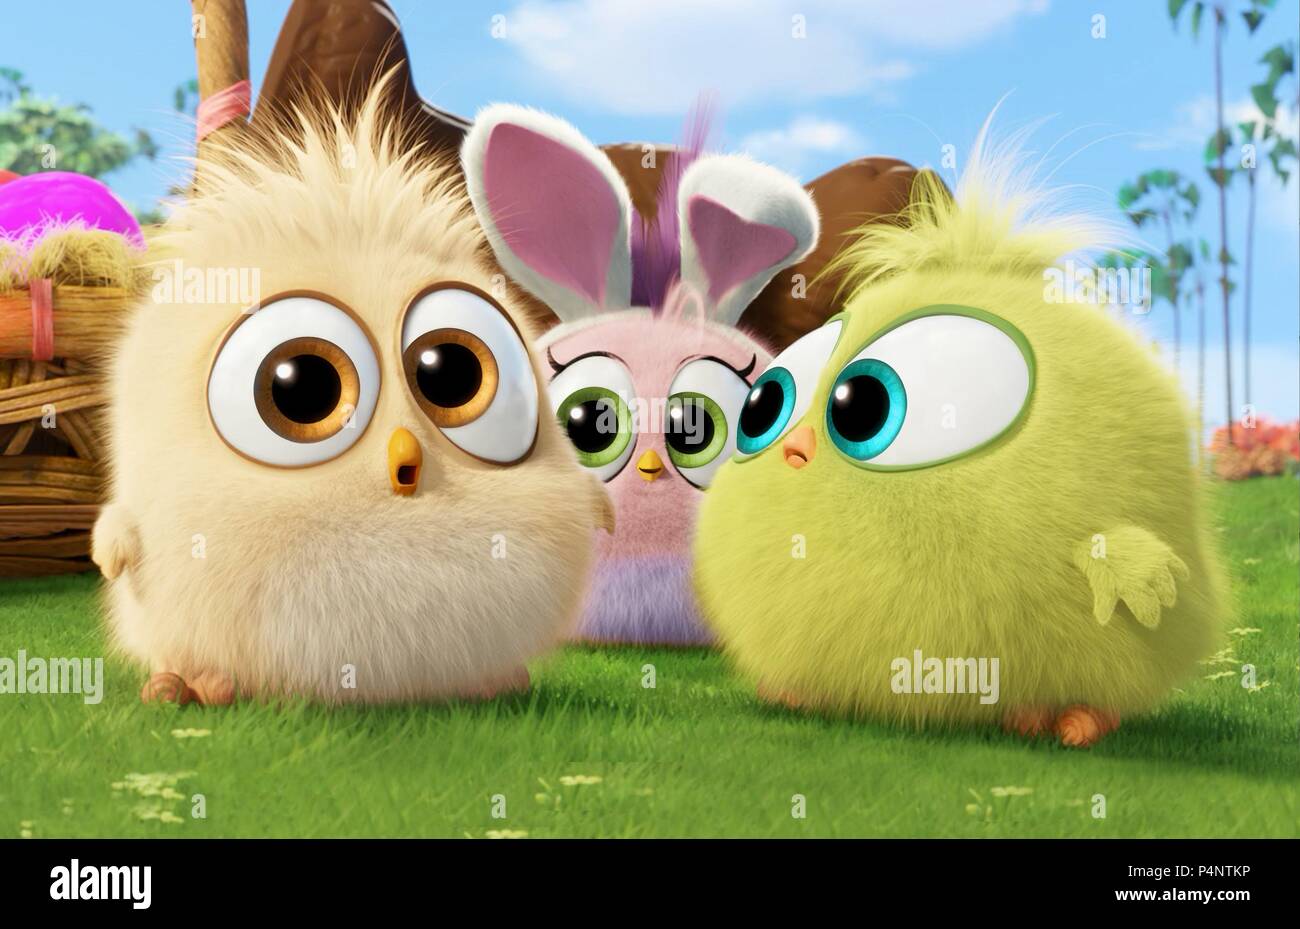 Original Film Title: ANGRY BIRDS. English Title: ANGRY BIRDS. Film  Director: DANNY MCBRIDE; CLAY KAYTIS; FERGAL REILLY. Year: 2016. Credit:  SONY PICTURES IMAGEWORKS / Album Stock Photo - Alamy